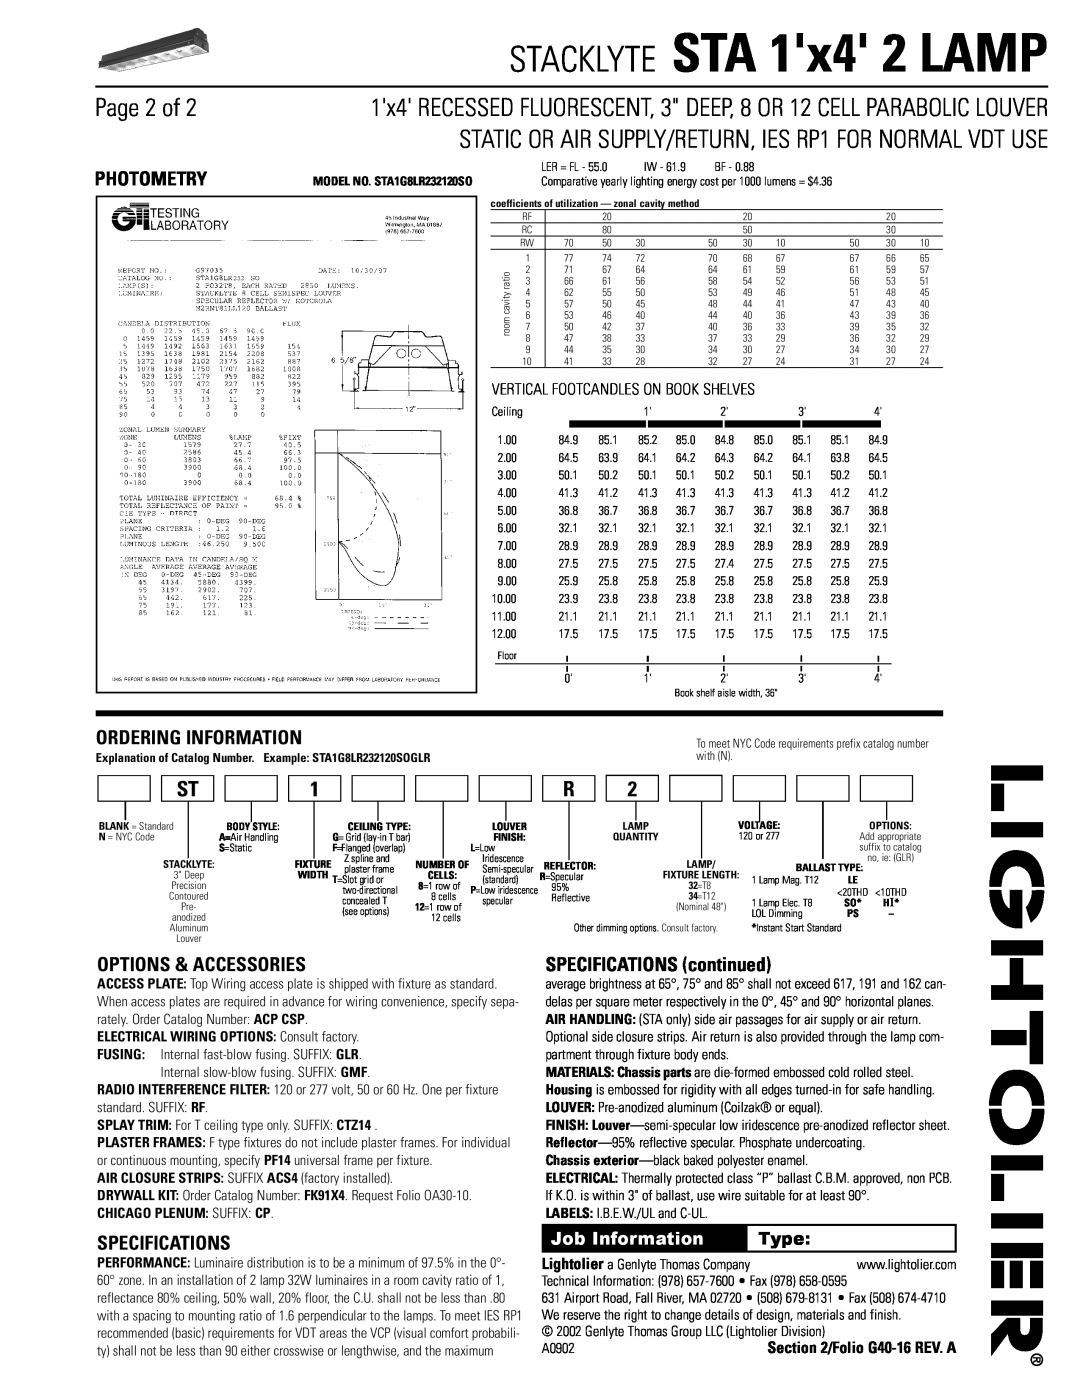 Lightolier Fluorescent Lighting Page 2 of, Photometry, Ordering Information, Options & Accessories, Specifications, Type 